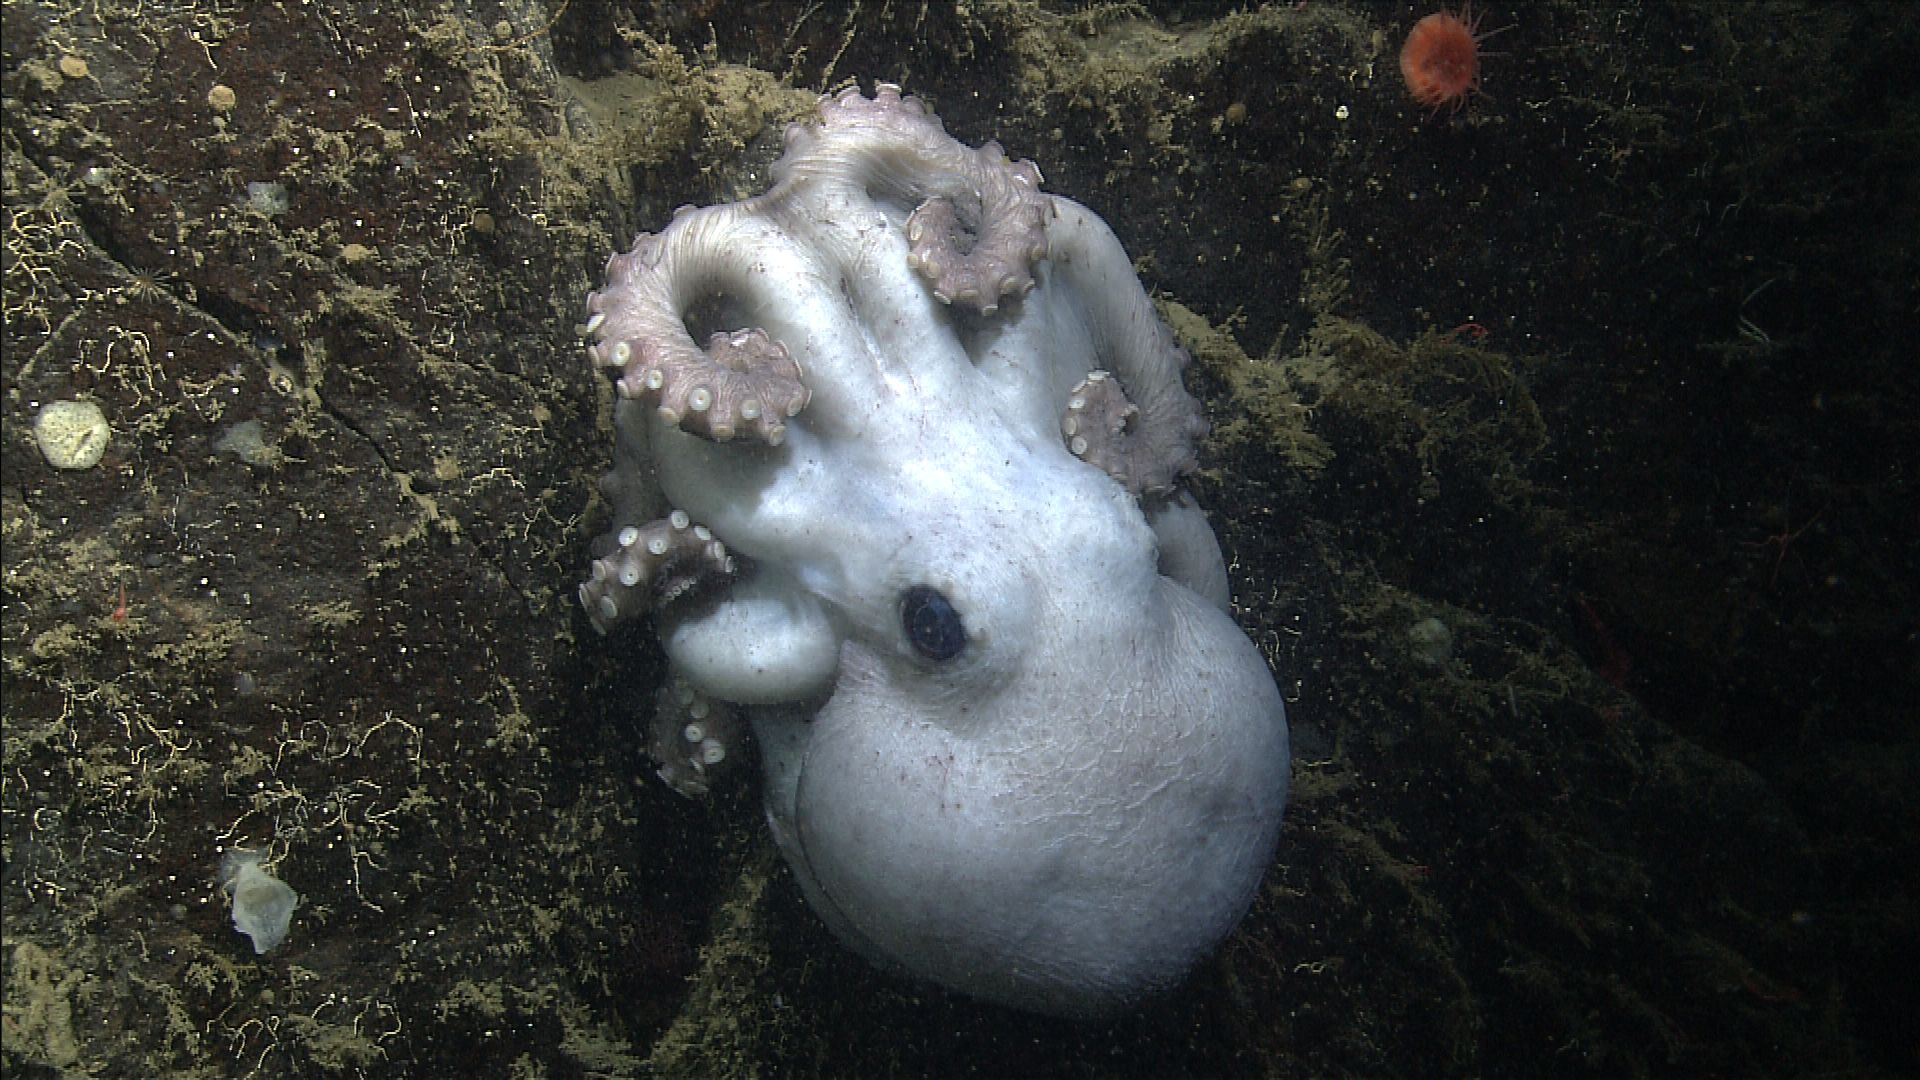 Octopus Broods Eggs for a Record 4½ Years, Then Dies, Scientists Report